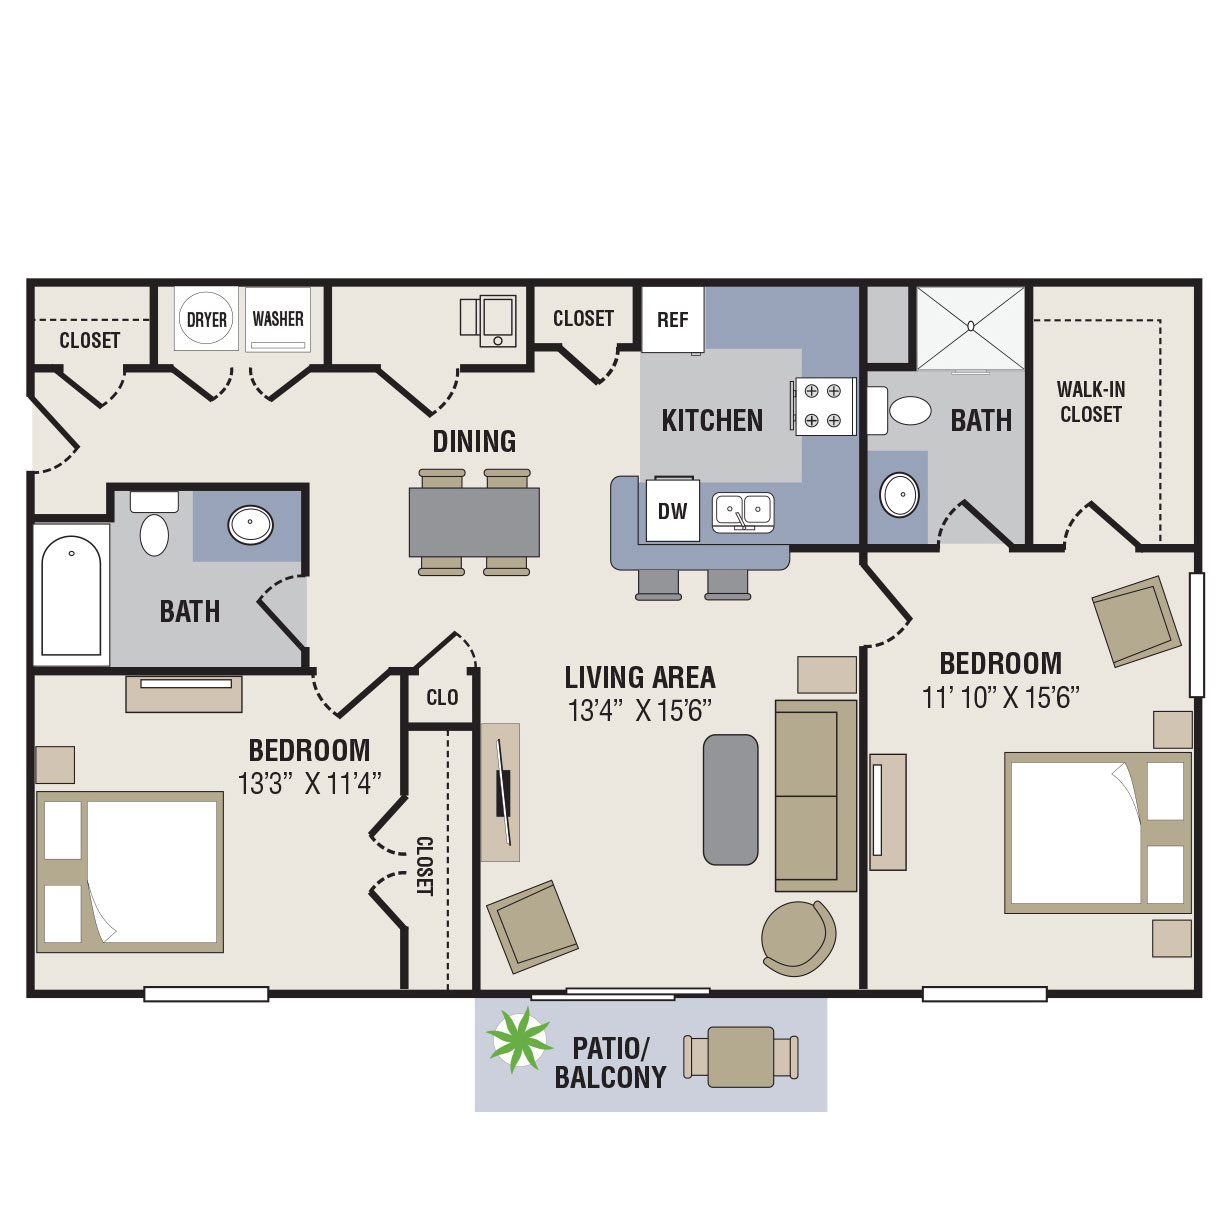 Informative Picture of 2BED-1.5BATH - 1102sqft